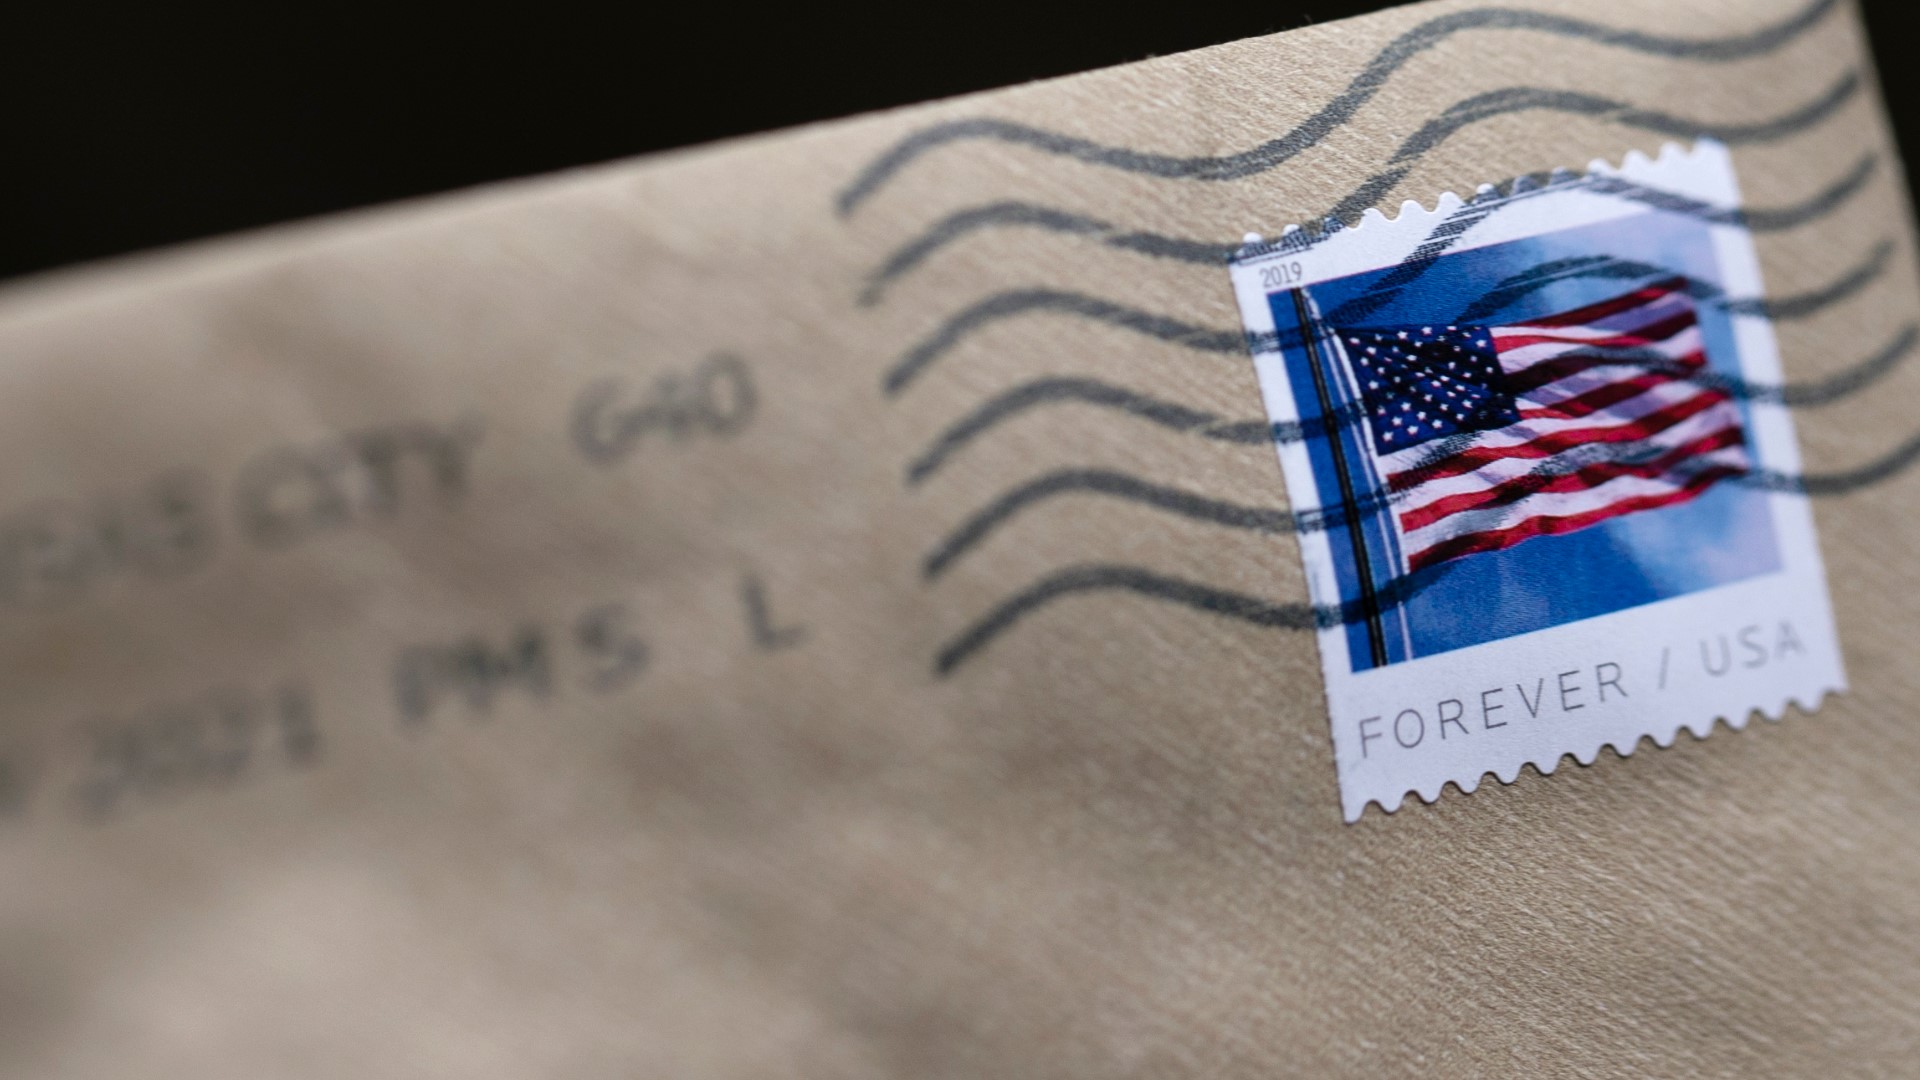 You will be paying more for stamps at the post office starting next week. The price hike comes just before the busy holiday shipping season.